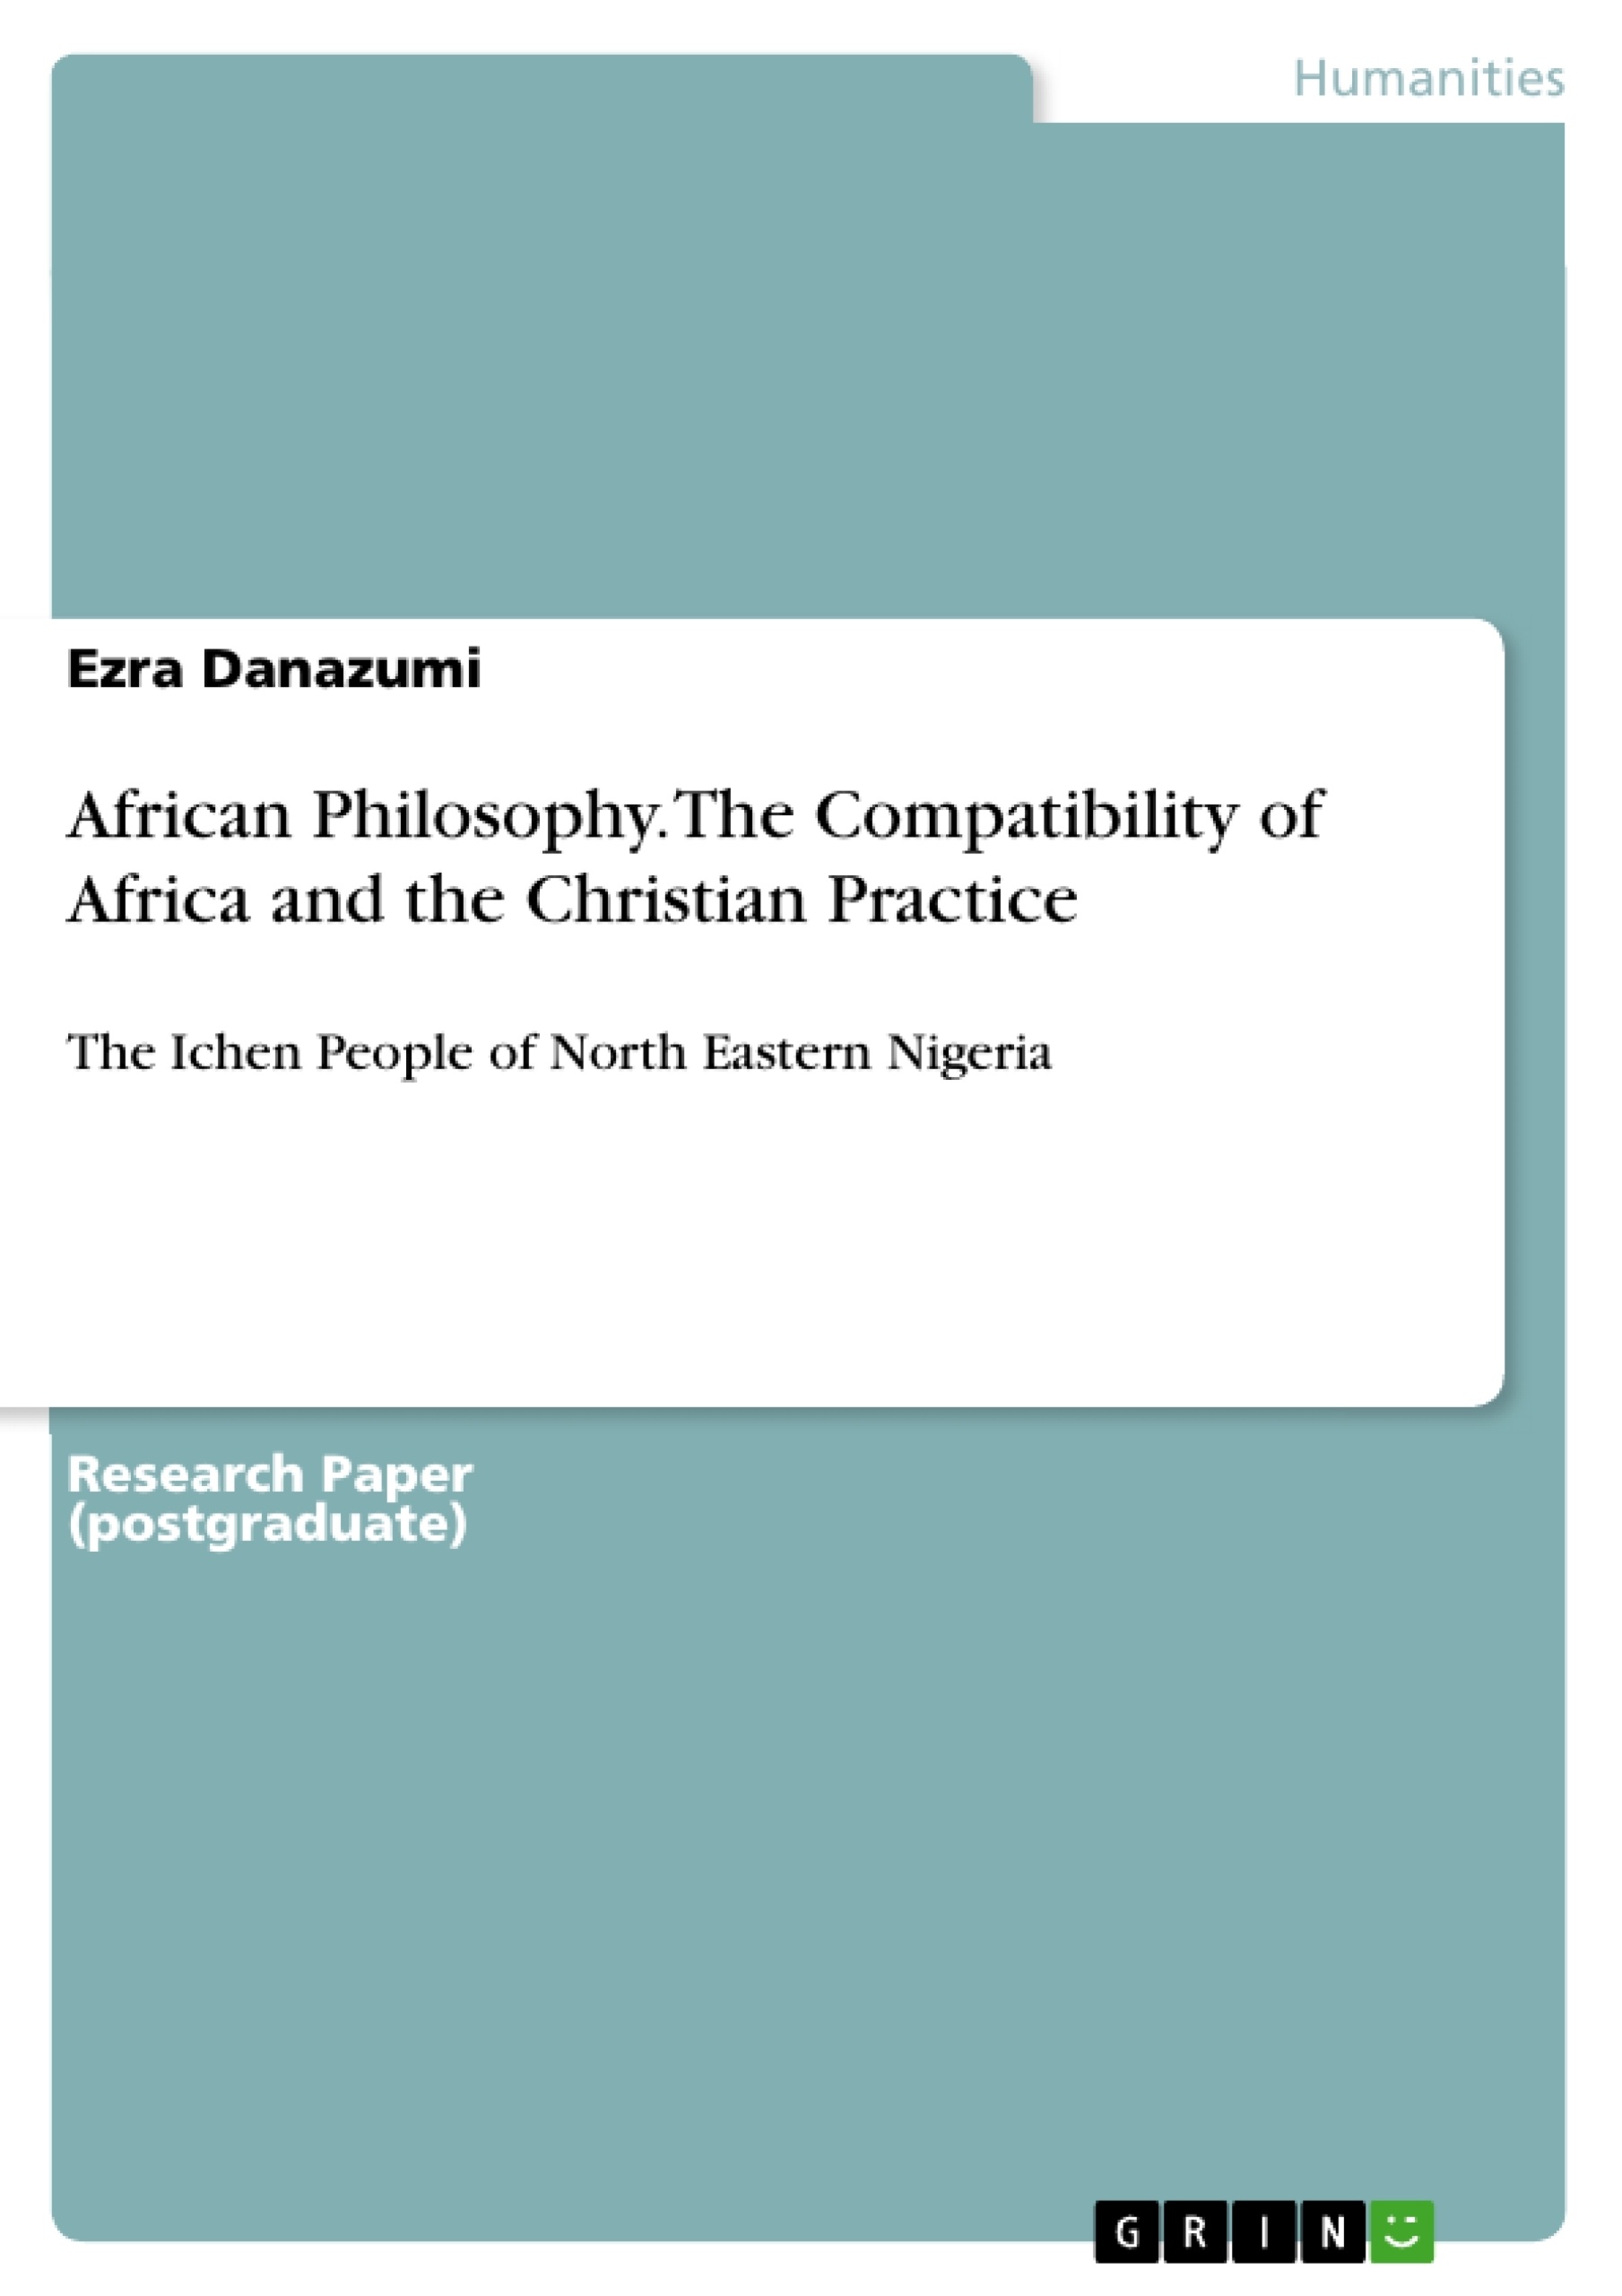 Titre: African Philosophy. The Compatibility of Africa and the Christian Practice